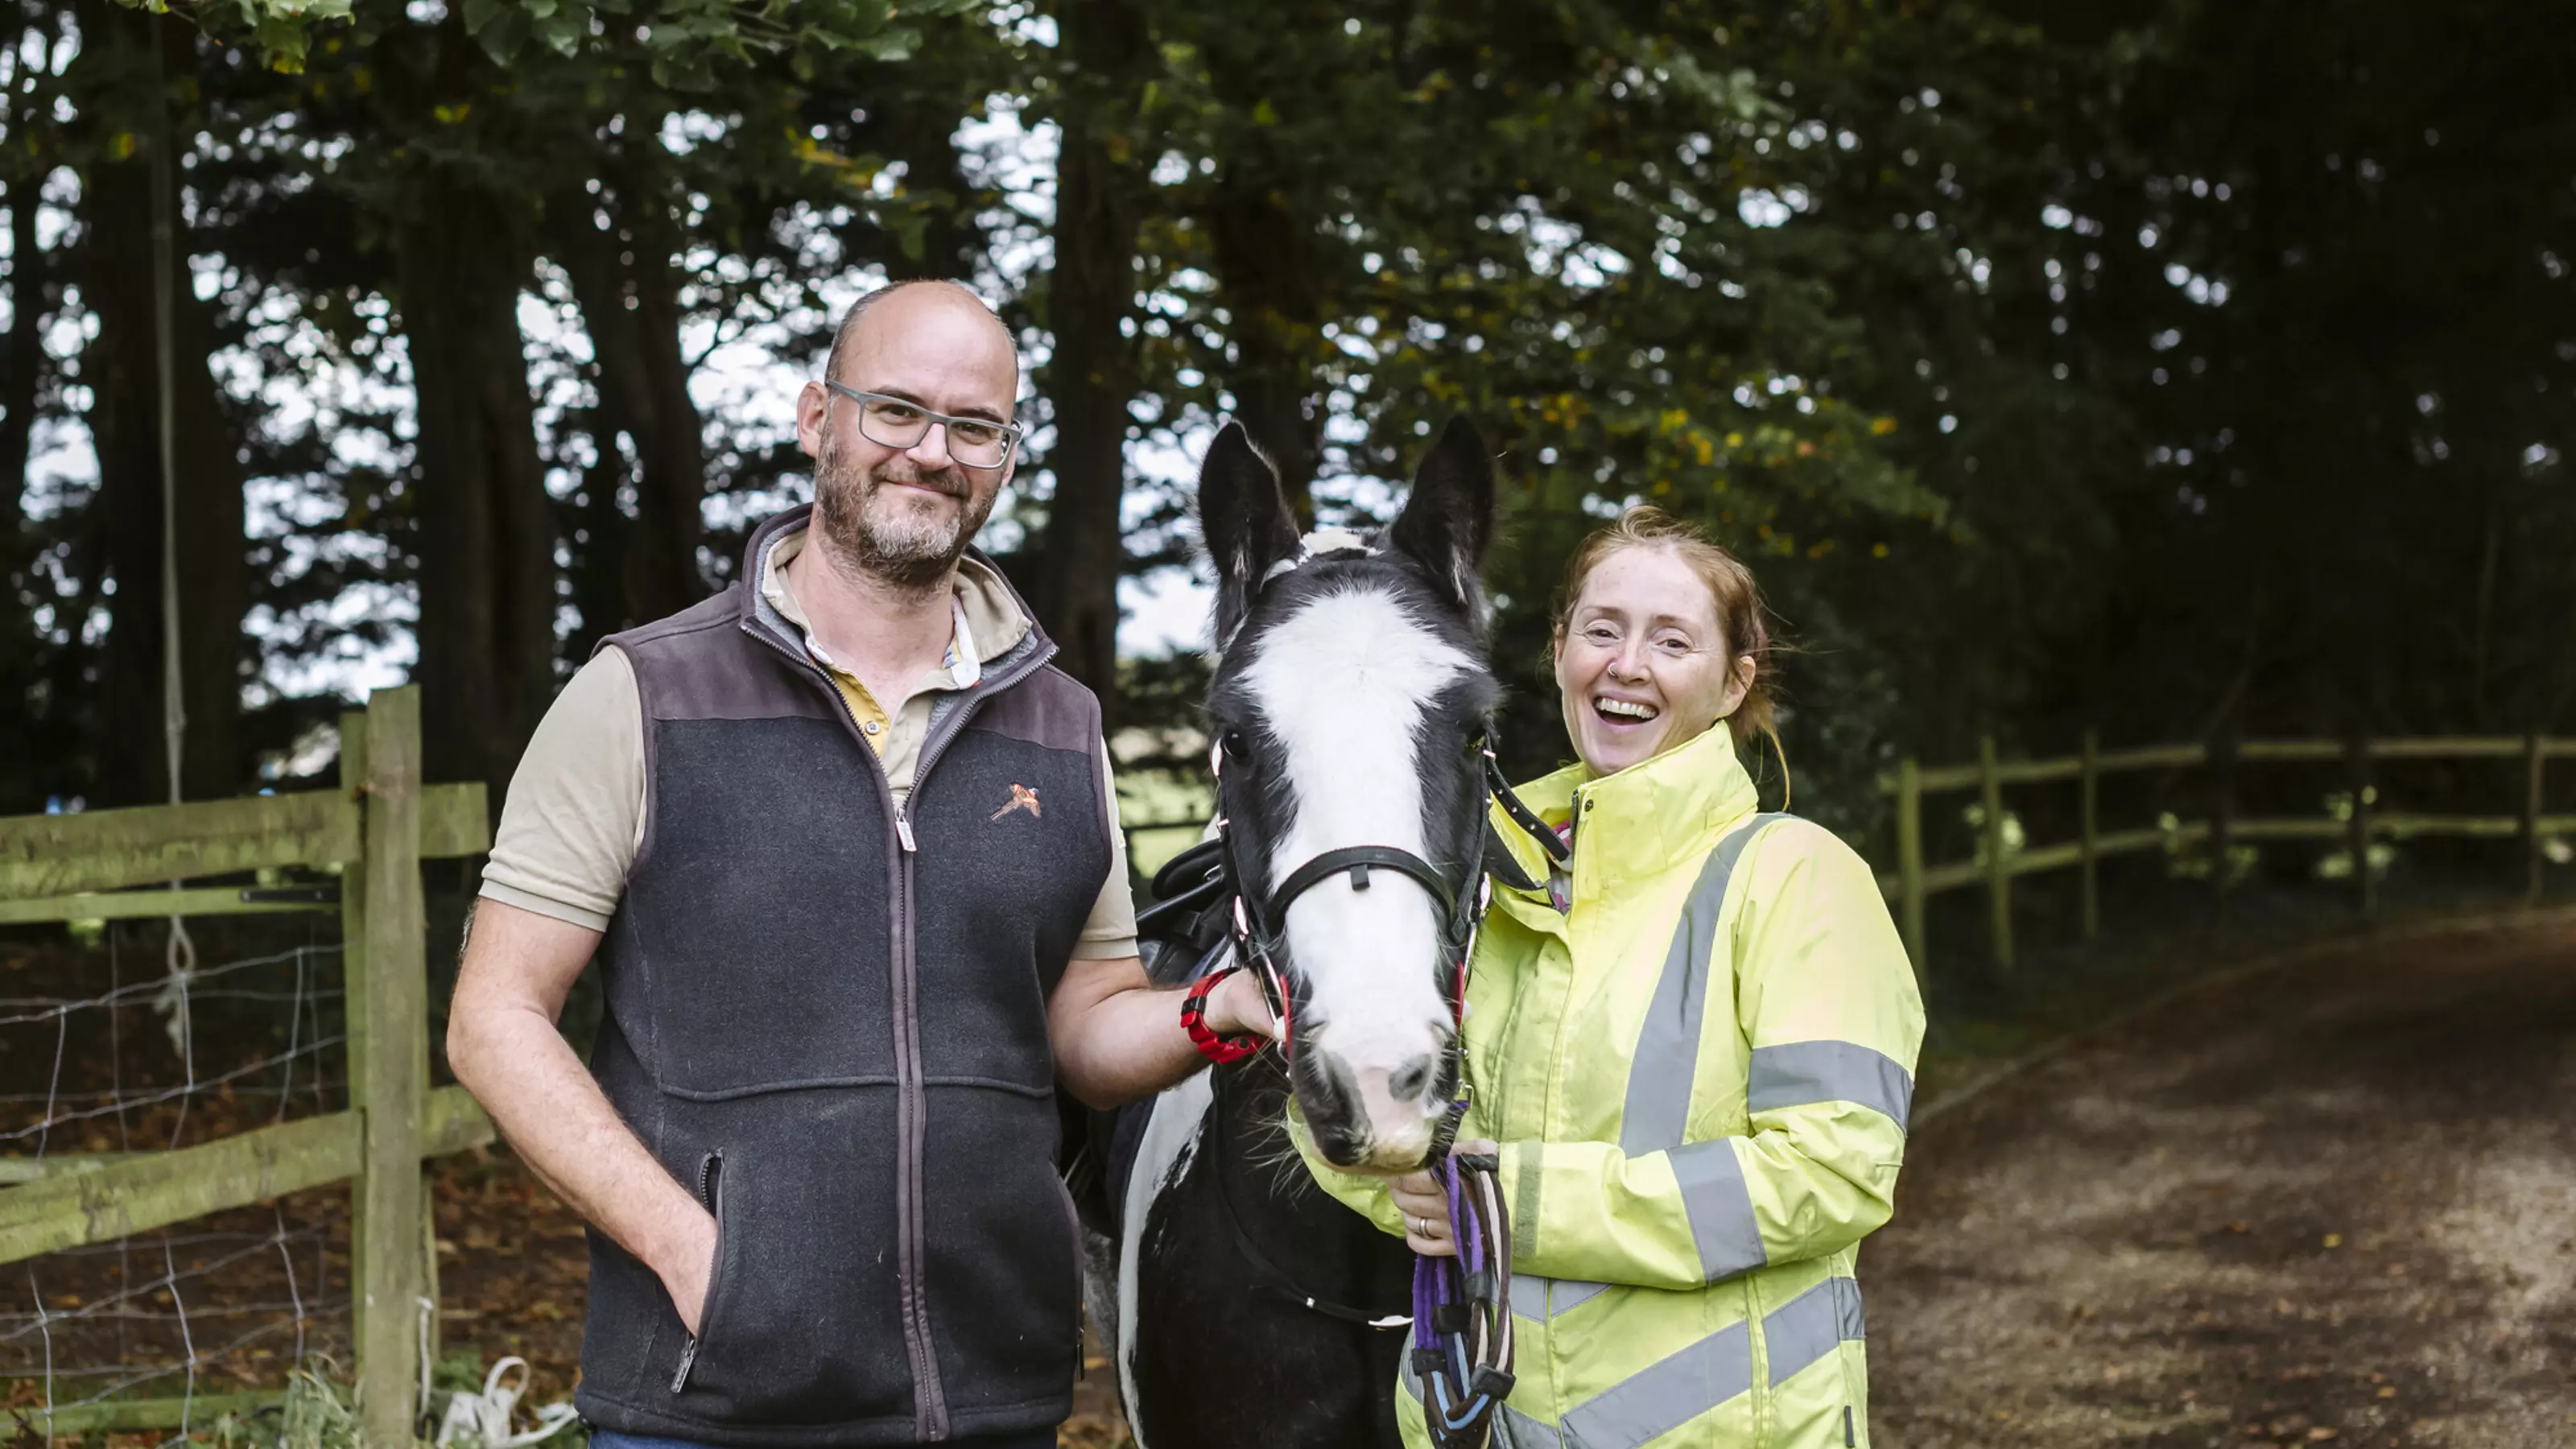 Micky, the black and white horse, with new owners Abi and James standing either side of him